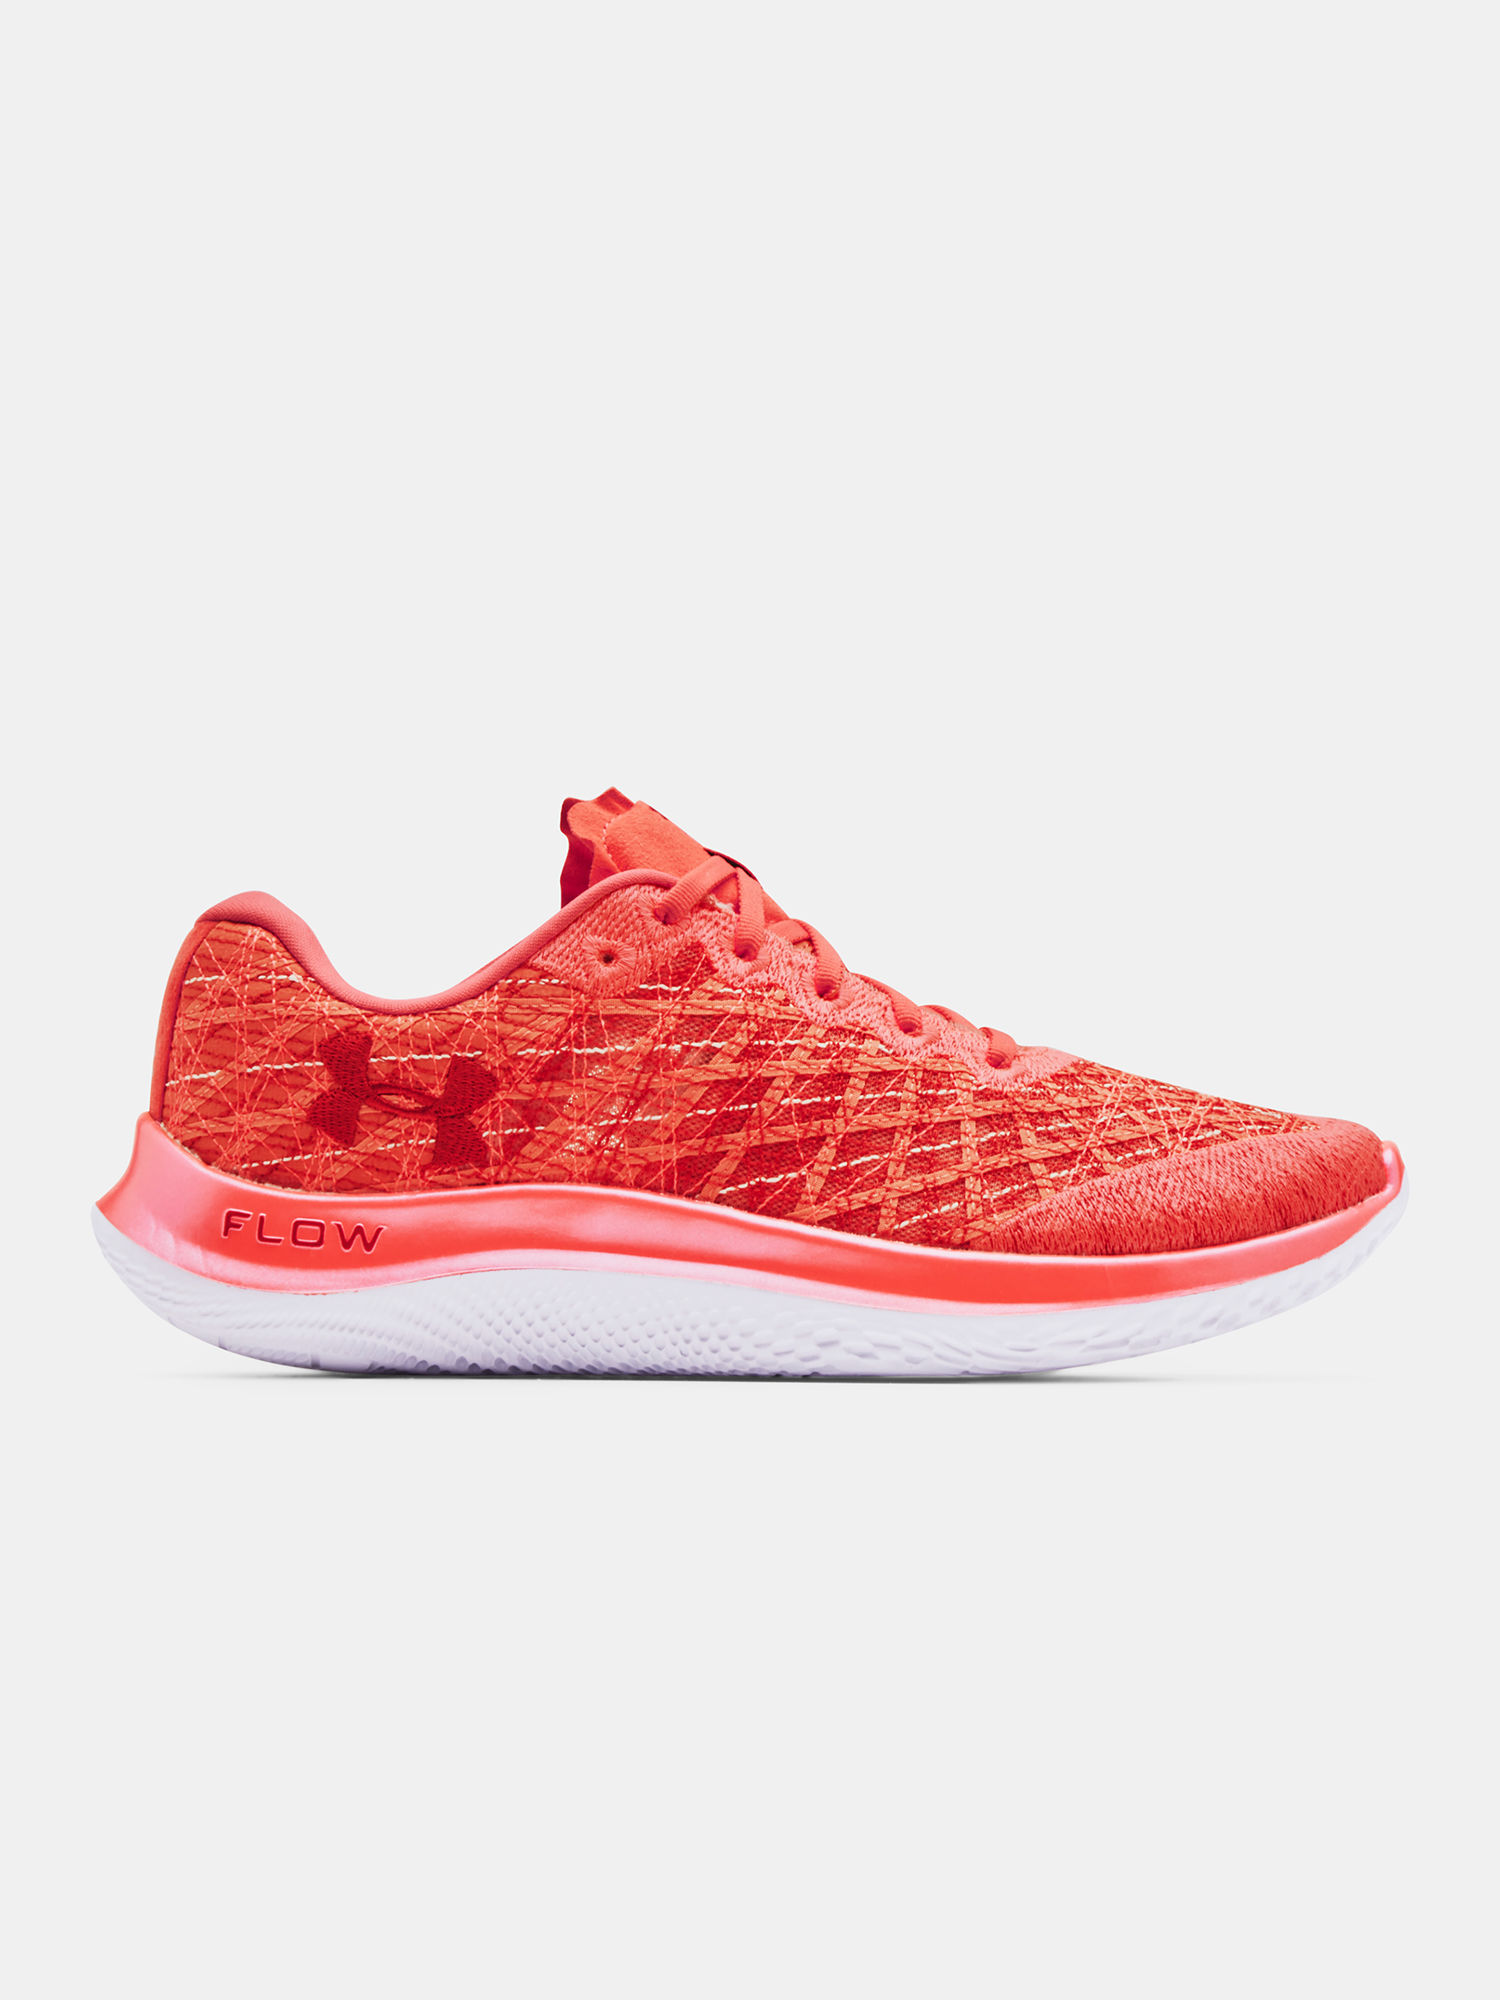 Boty Under Armour FLOW Velociti Wind-RED (1)